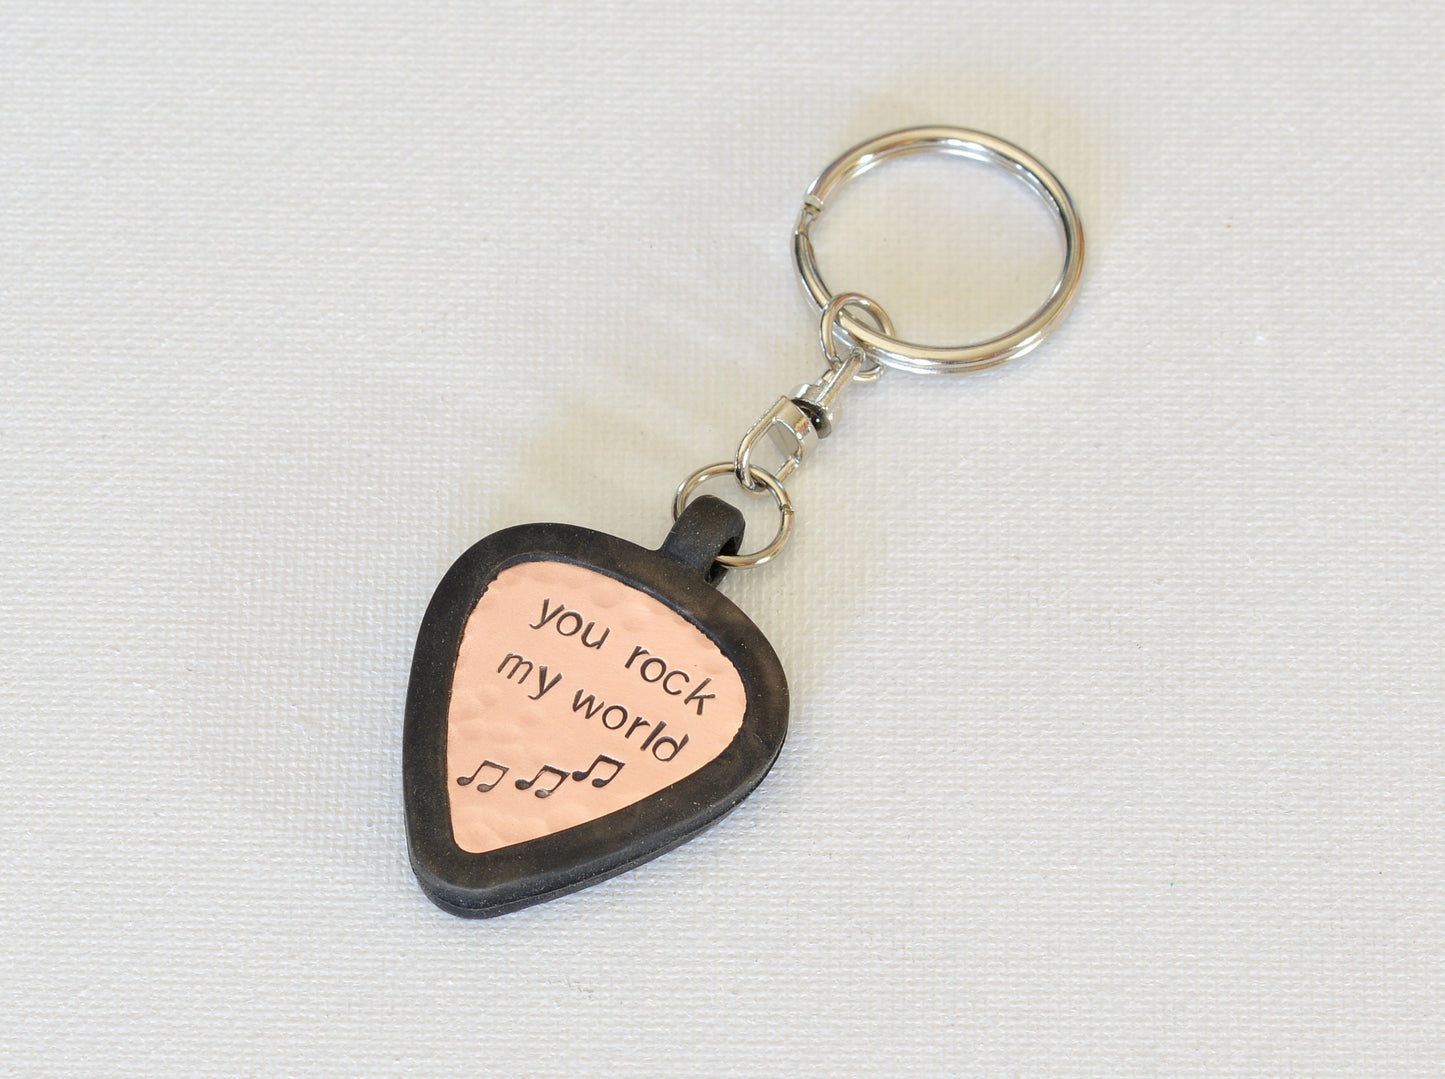 Copper guitar pick keychain with rubber holder